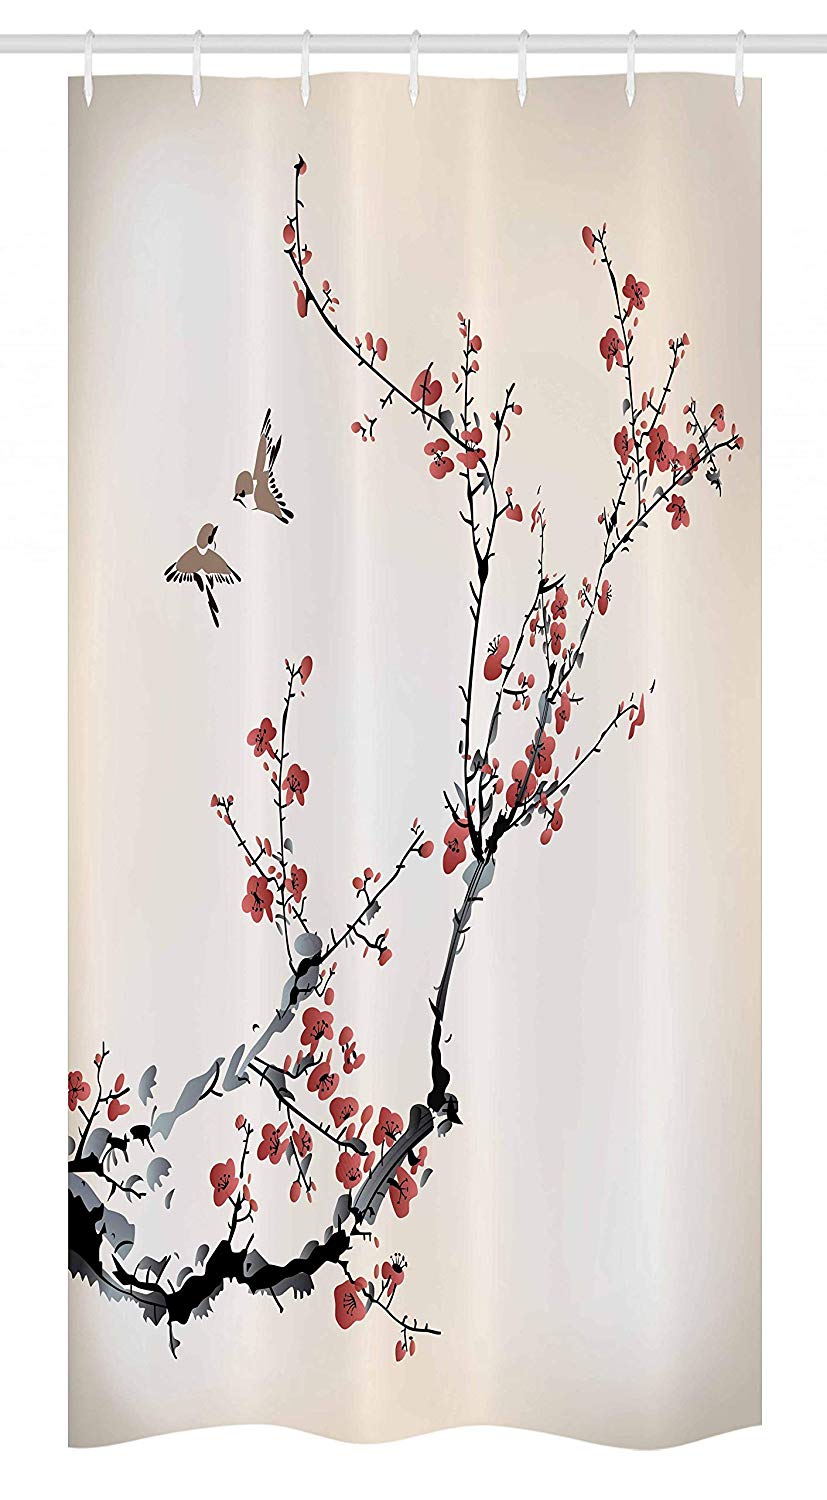 Ambesonne Nature Stall Shower Curtain, Cherry Branches Flowers Buds and Birds Style Artwork with Painting Effect, Fabric Bathroom Decor Set with Hooks, 36